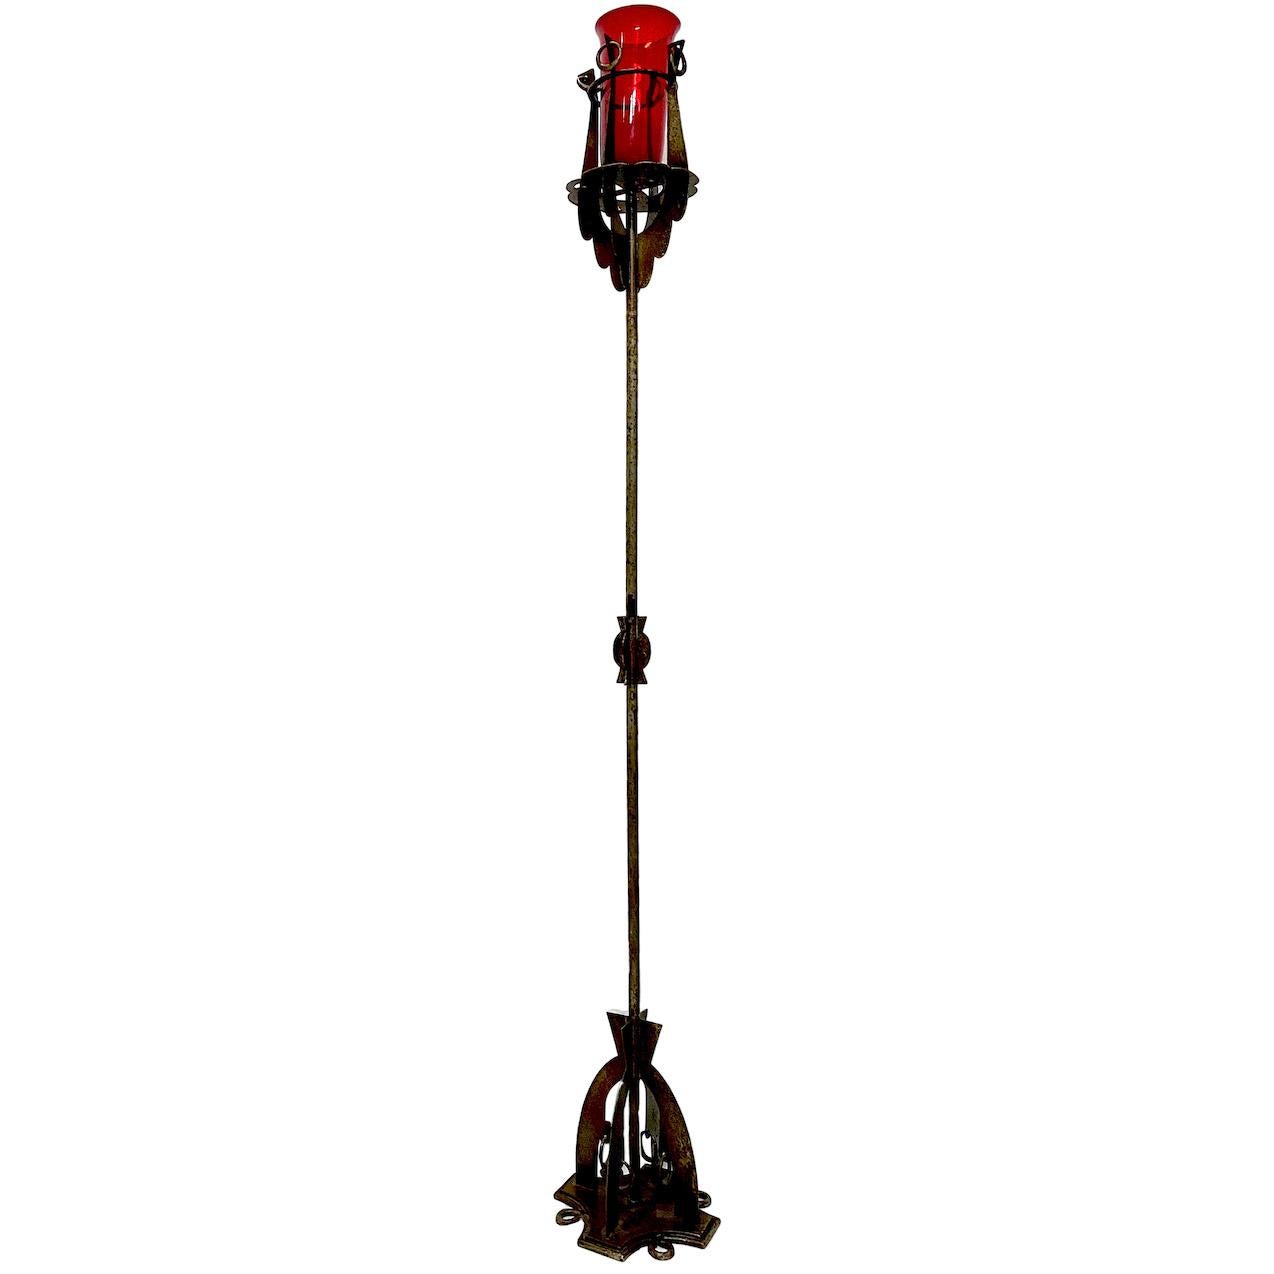 A pair of circa 1900 French wrought iron torchère floor lamps with ruby red glass inset.

Measurements:
Height 68